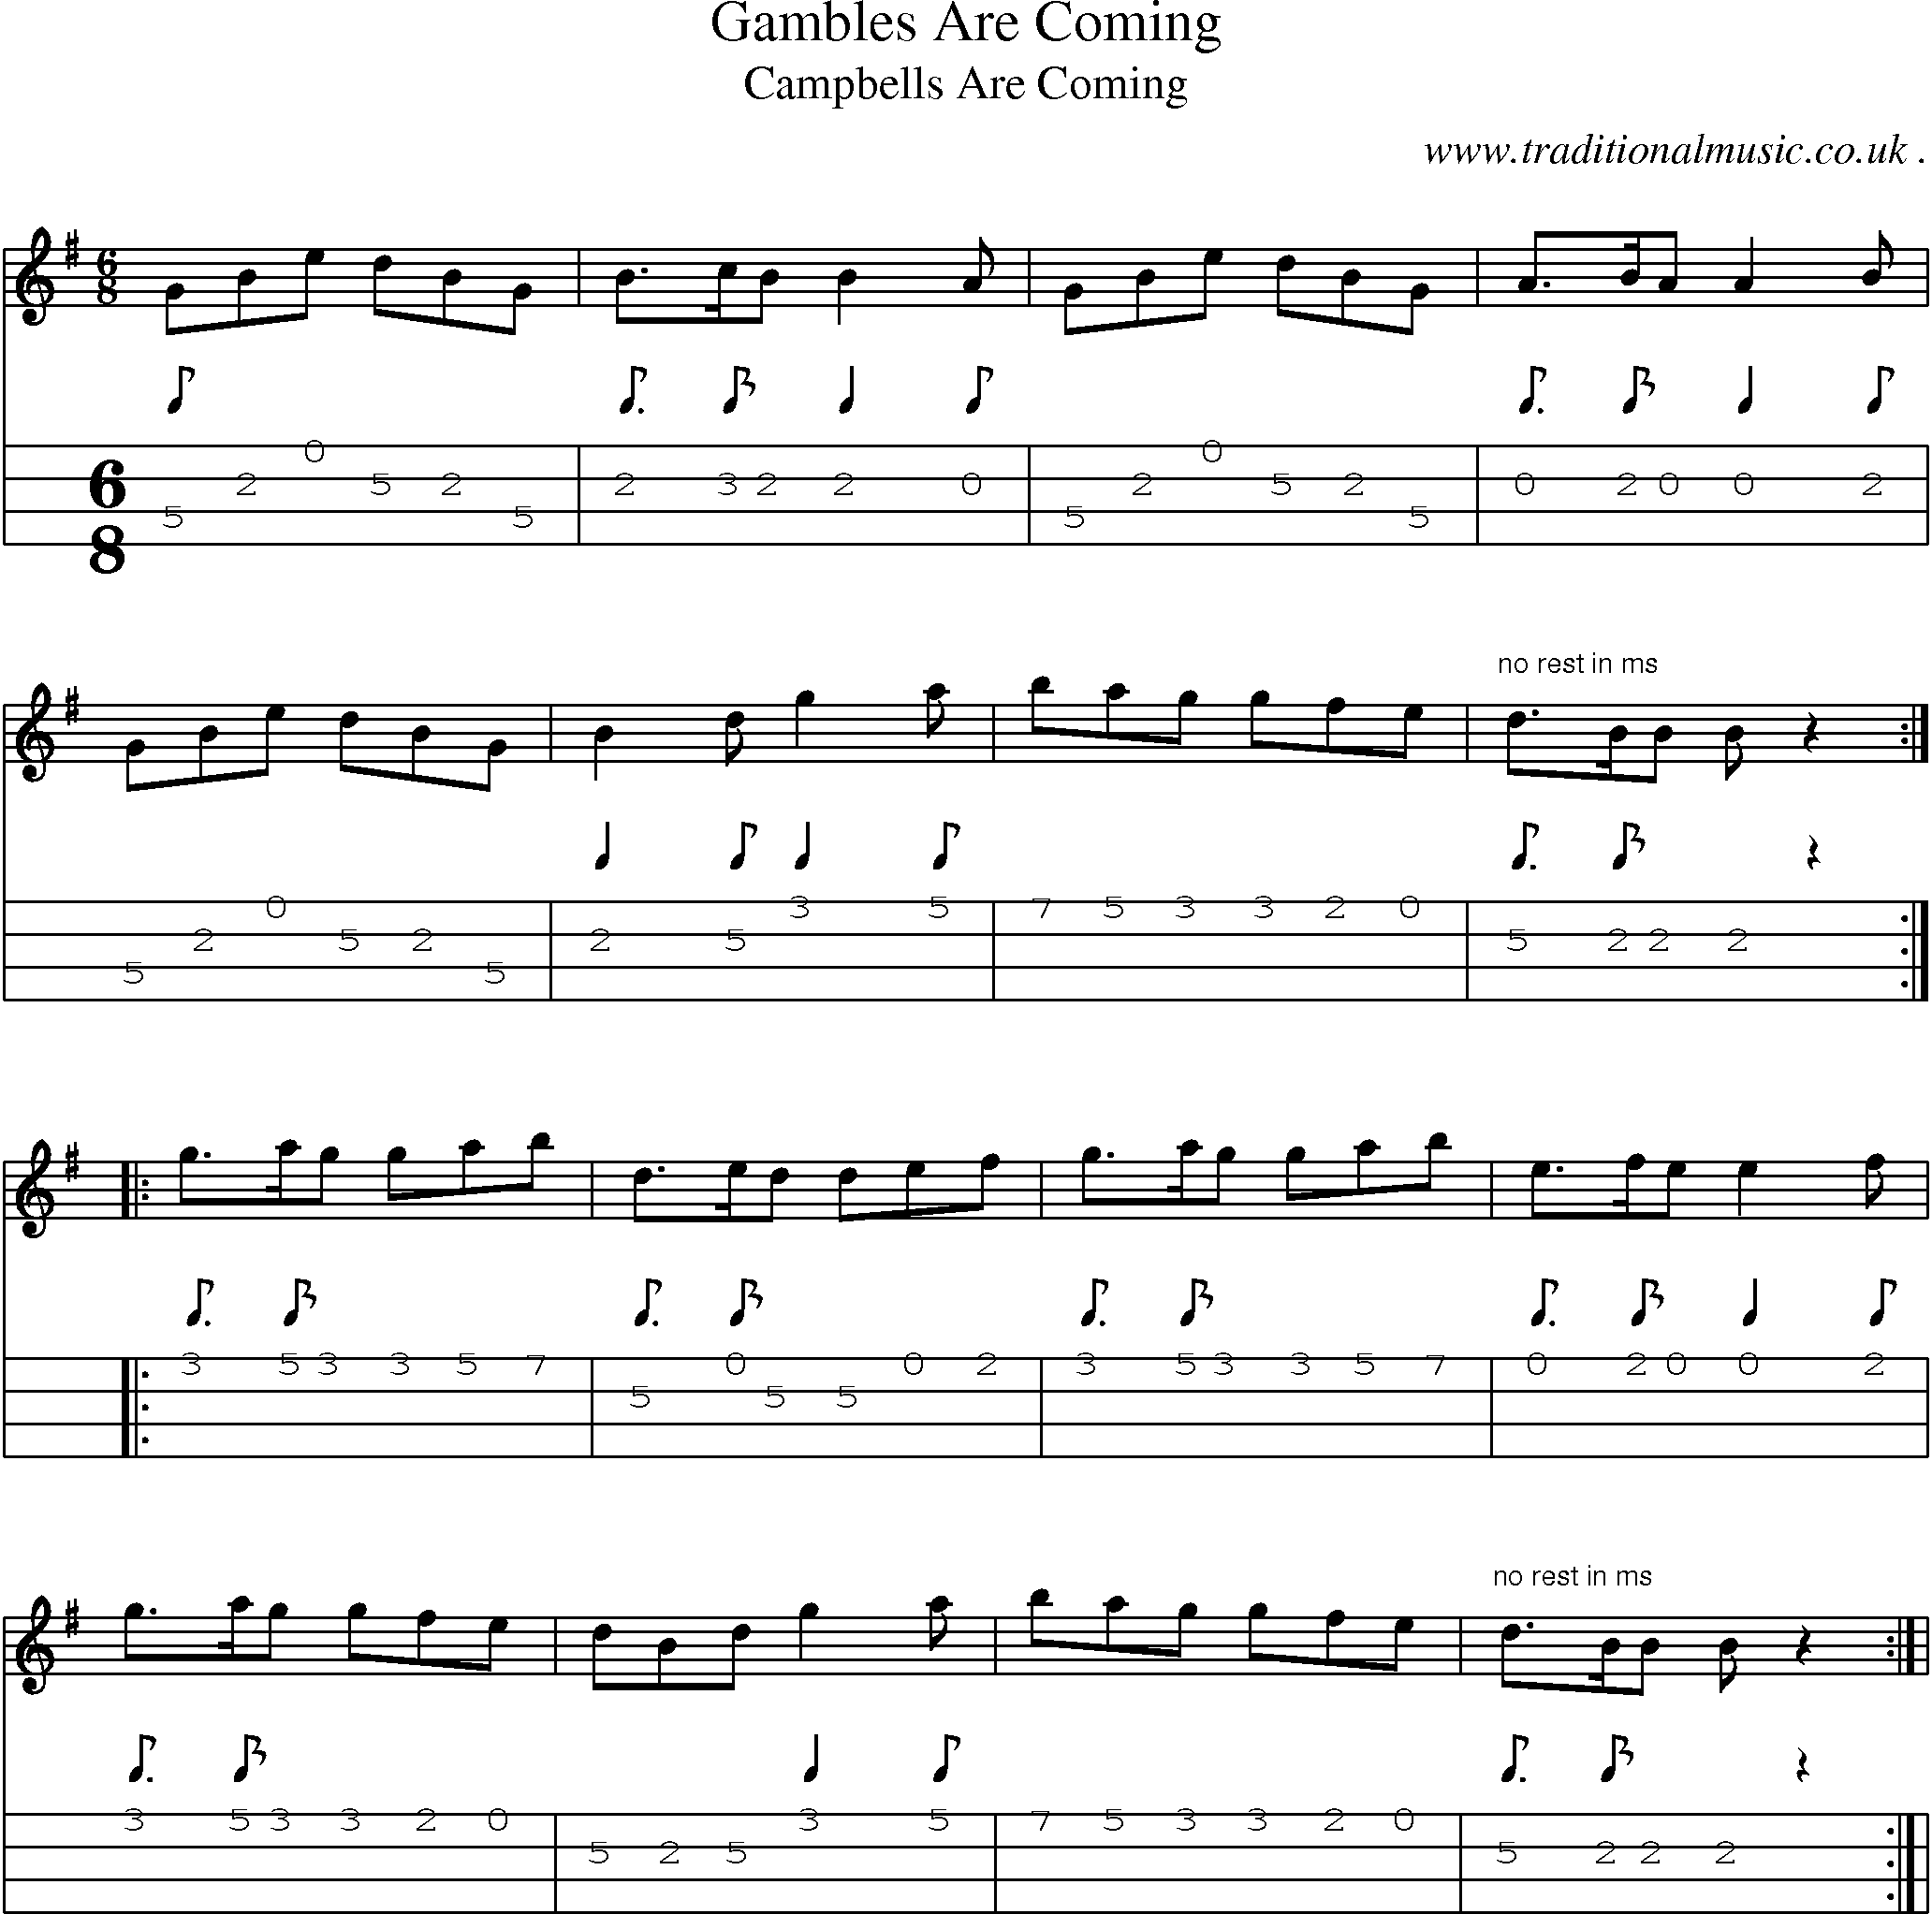 Sheet-Music and Mandolin Tabs for Gambles Are Coming